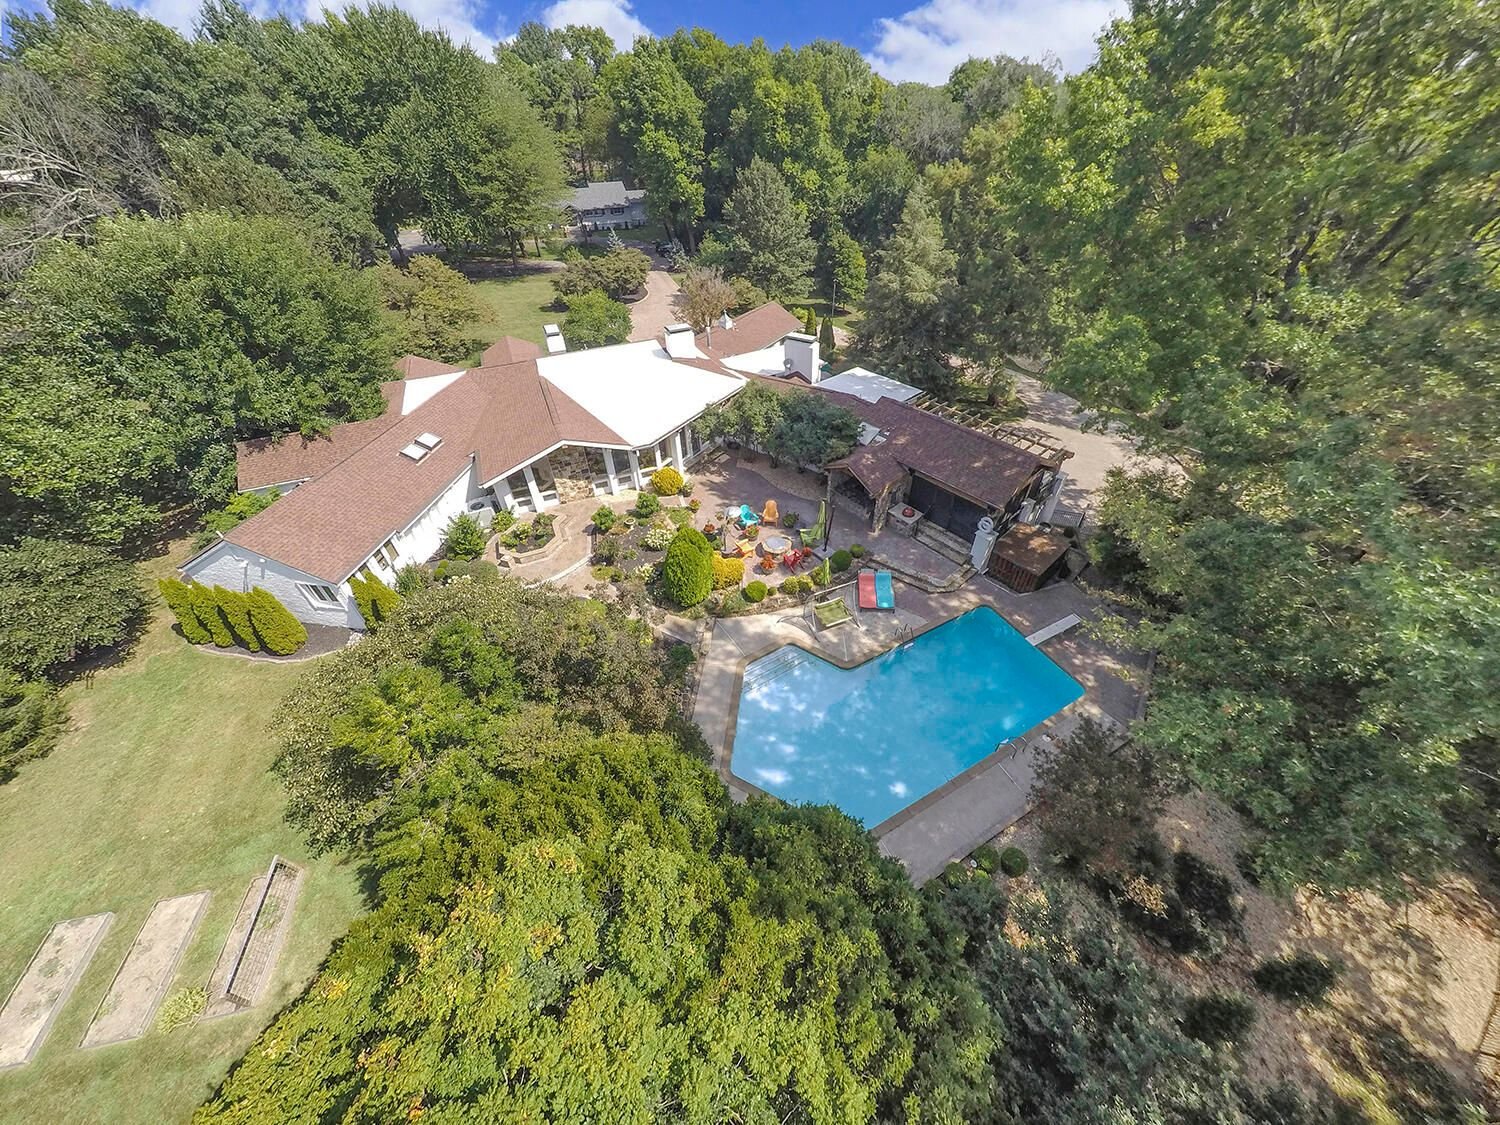 2342 E. Fritts Lane
$1.4 million
Bedrooms: 4
Bathrooms: 8
Listing firm: Re/Max House of Brokers